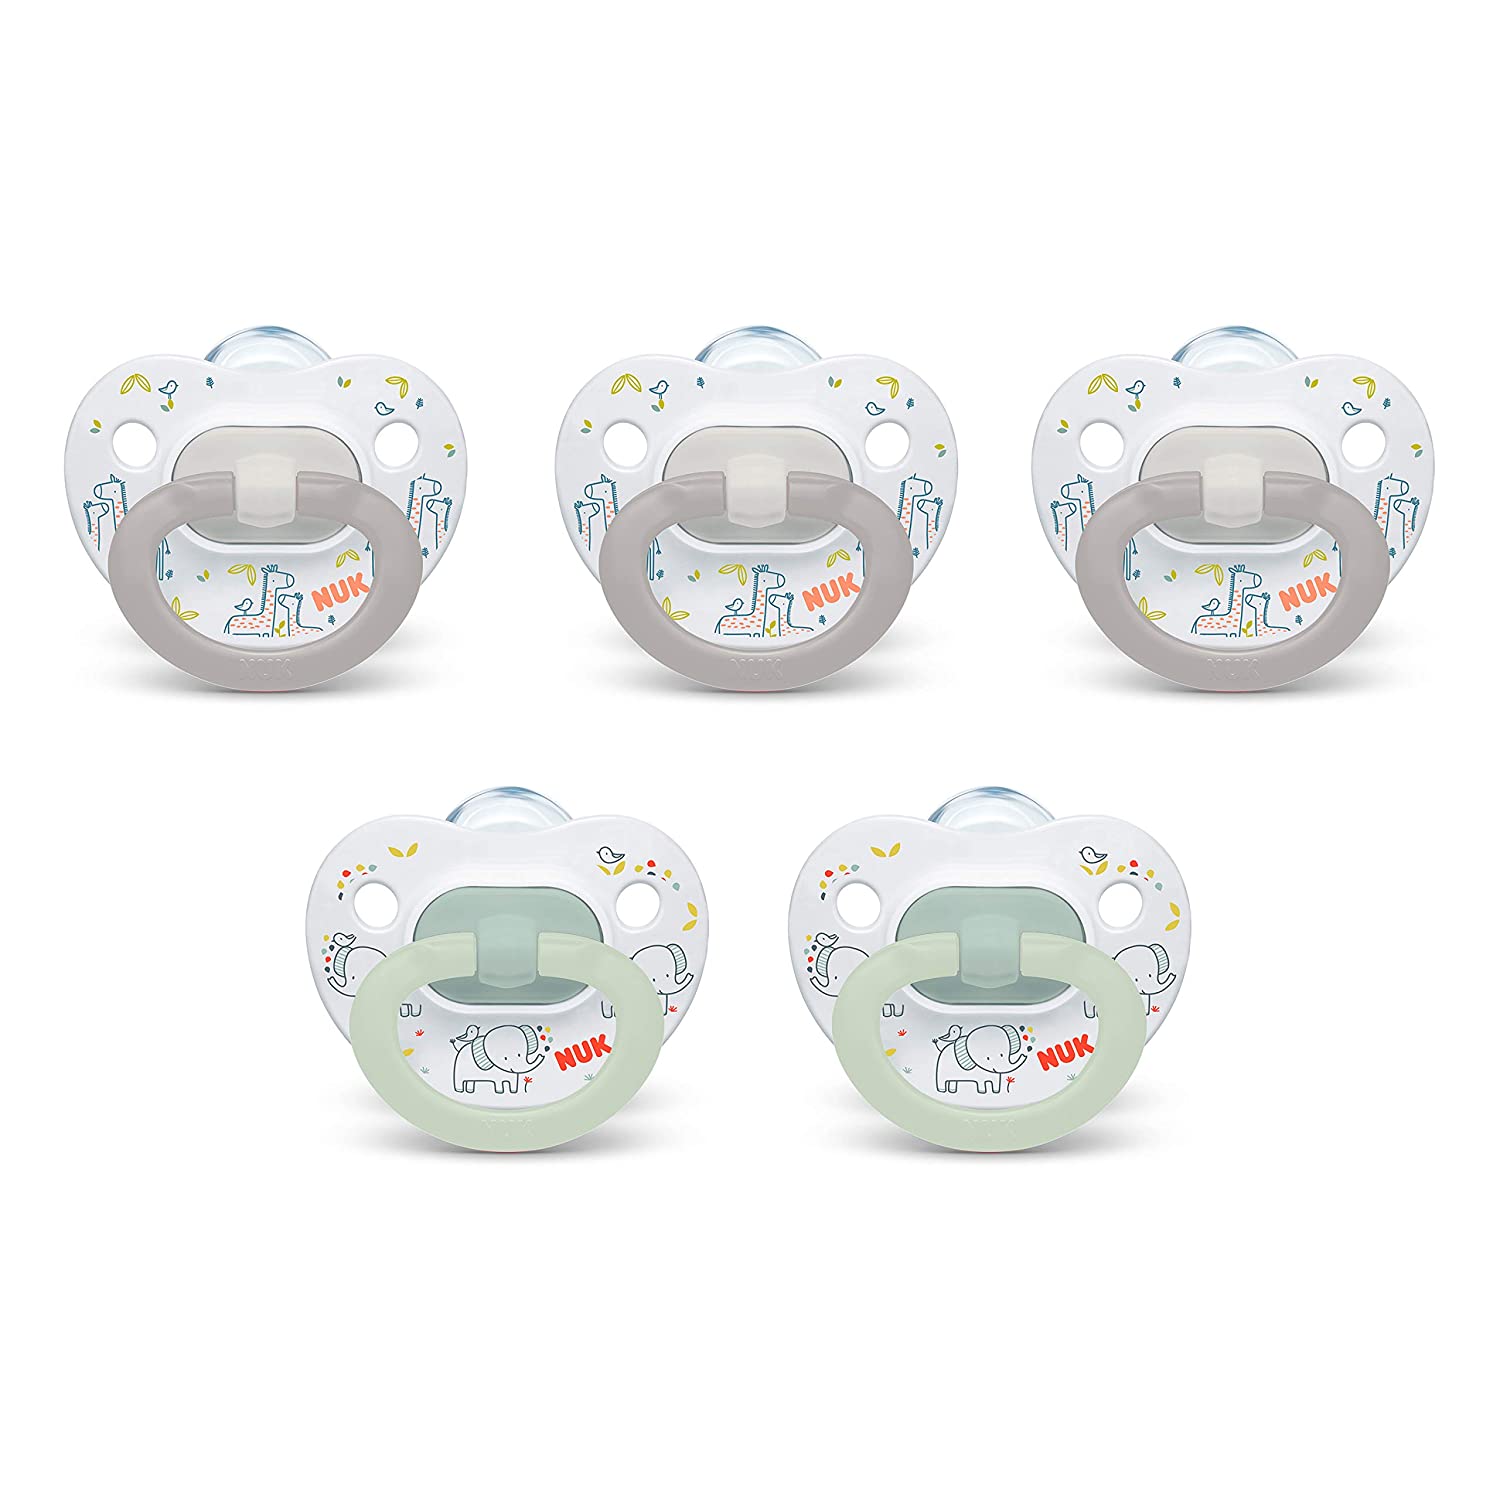 NUK Orthodontic Pacifiers 5pk $5.3 Free Shipping